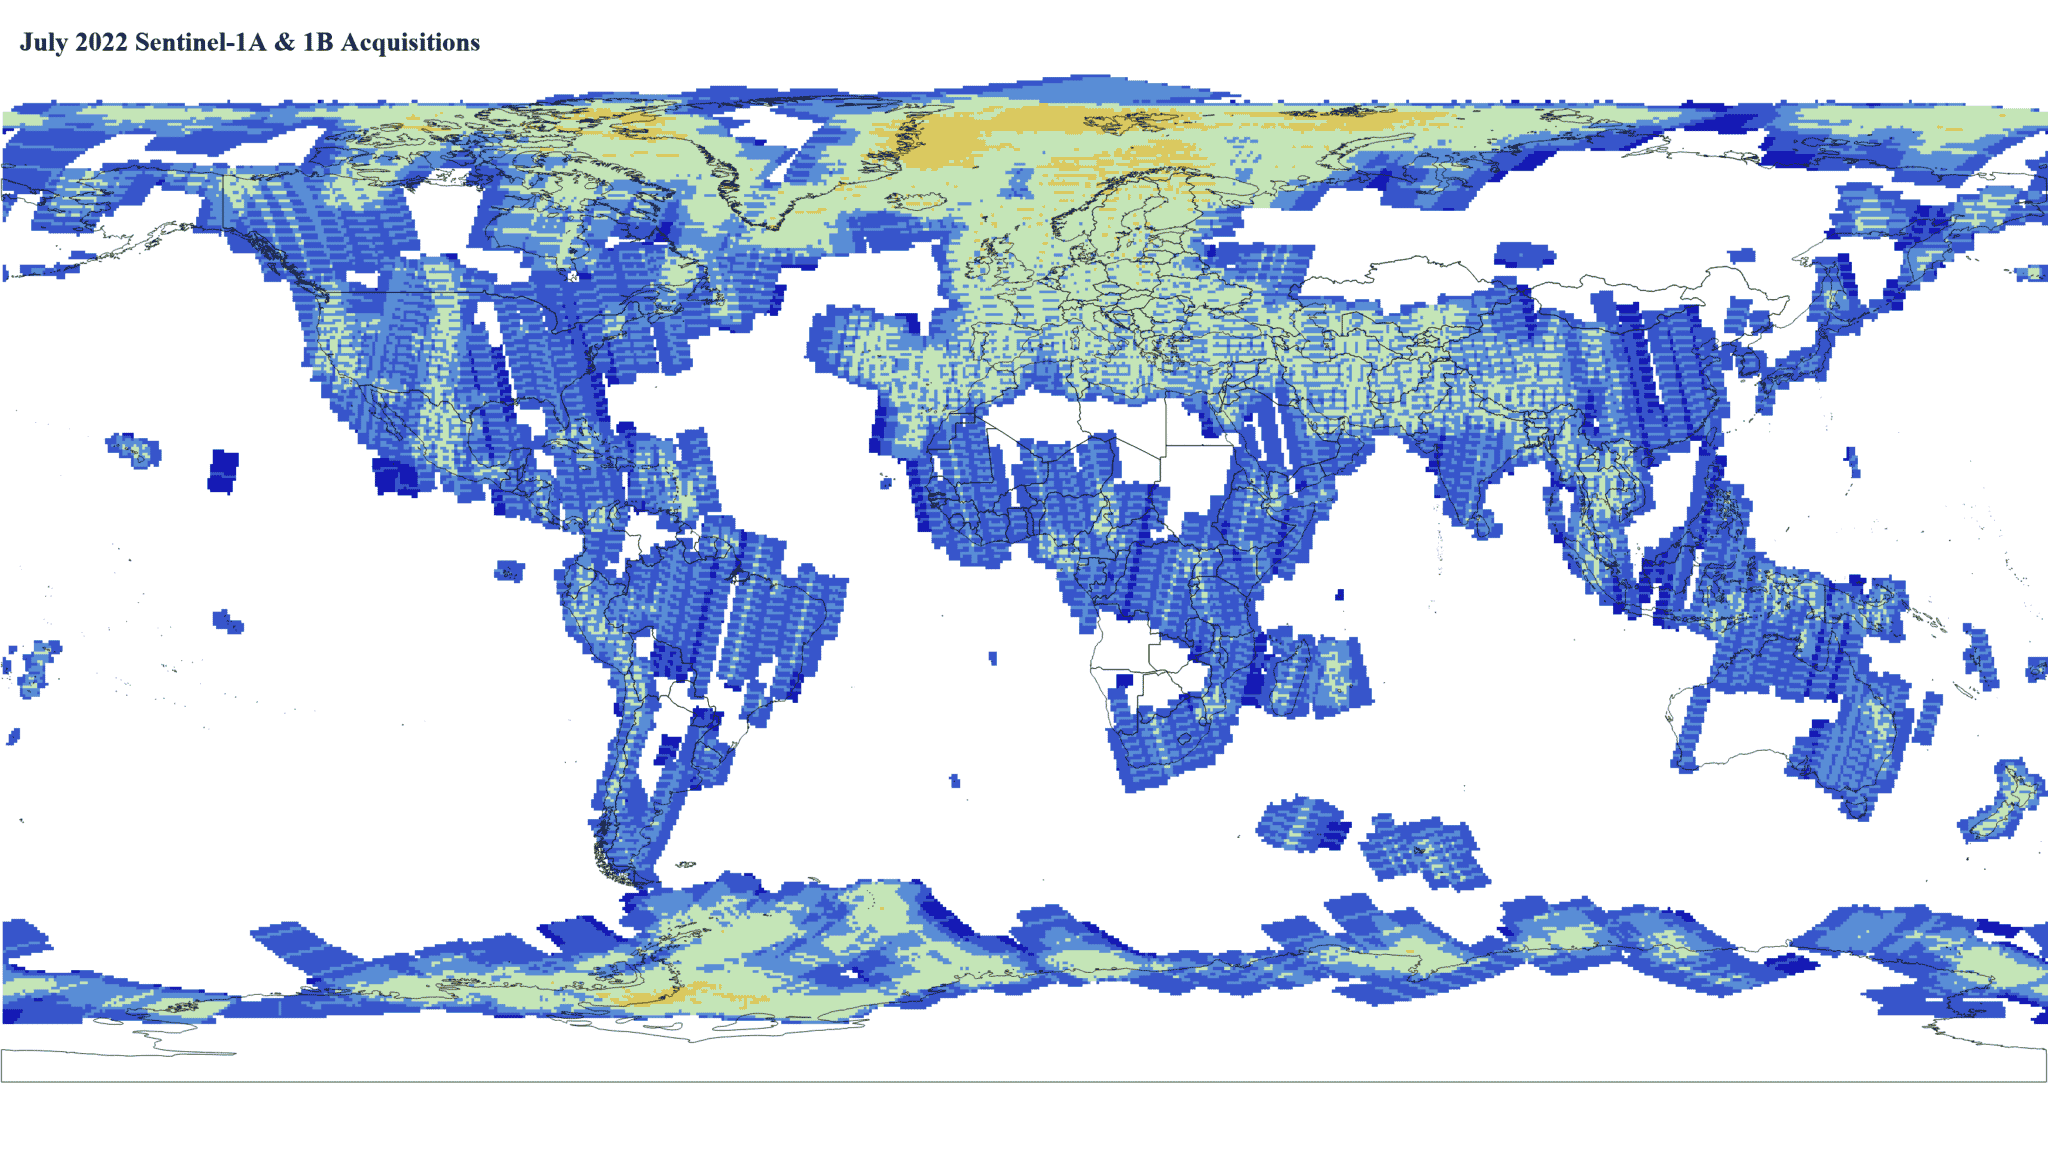 Heat map of Sentinel-1A and -1B SLC global acquisitions July 2022